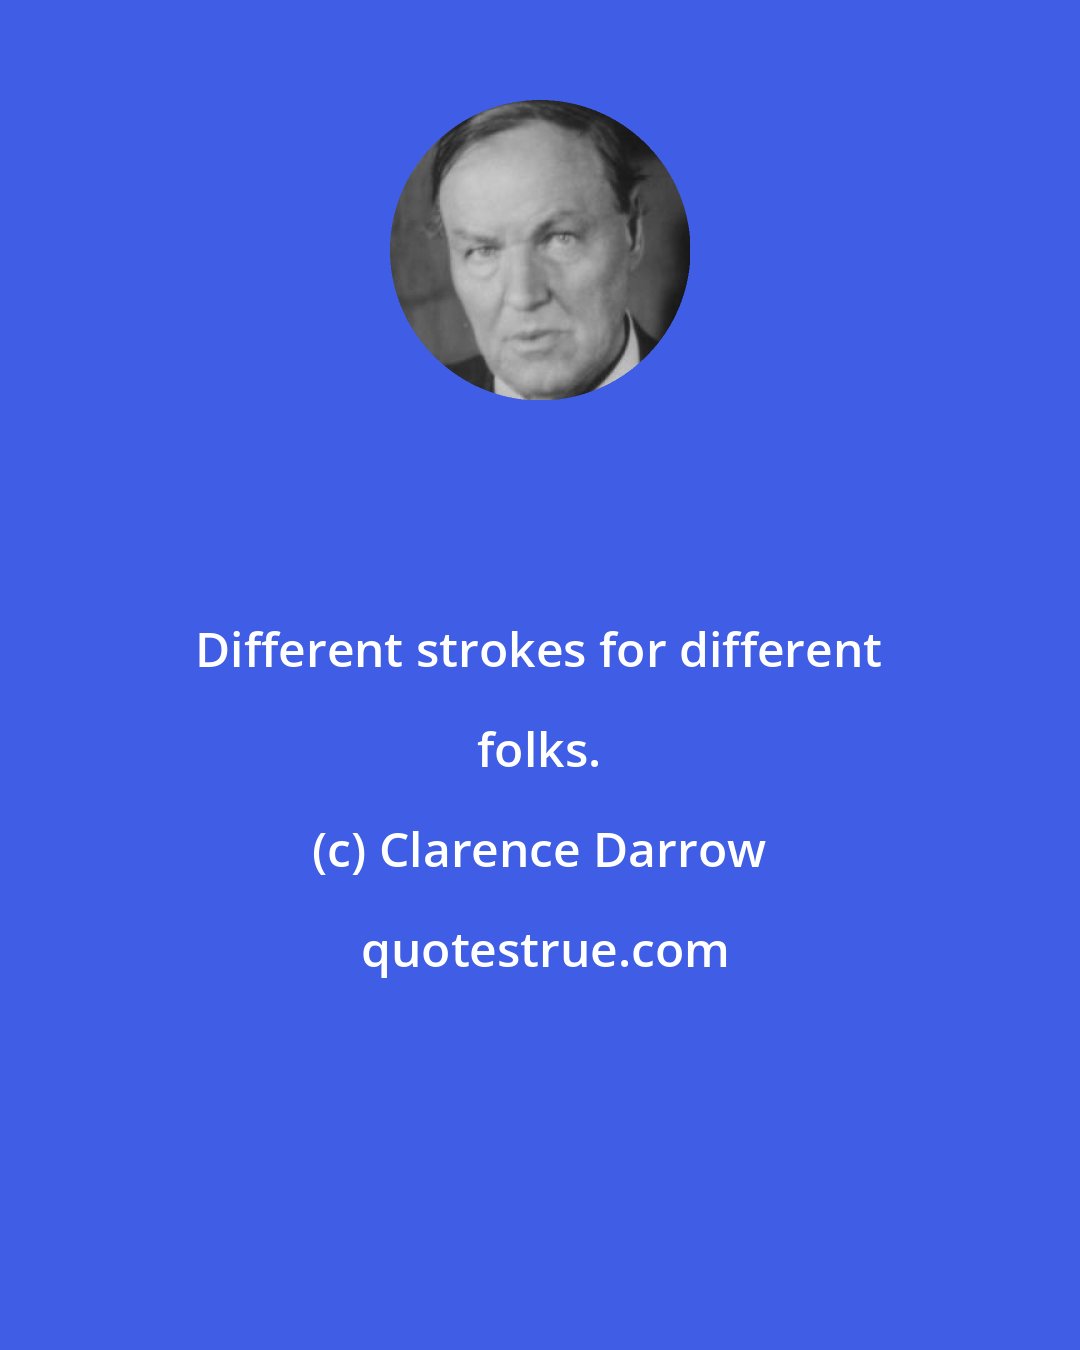 Clarence Darrow: Different strokes for different folks.